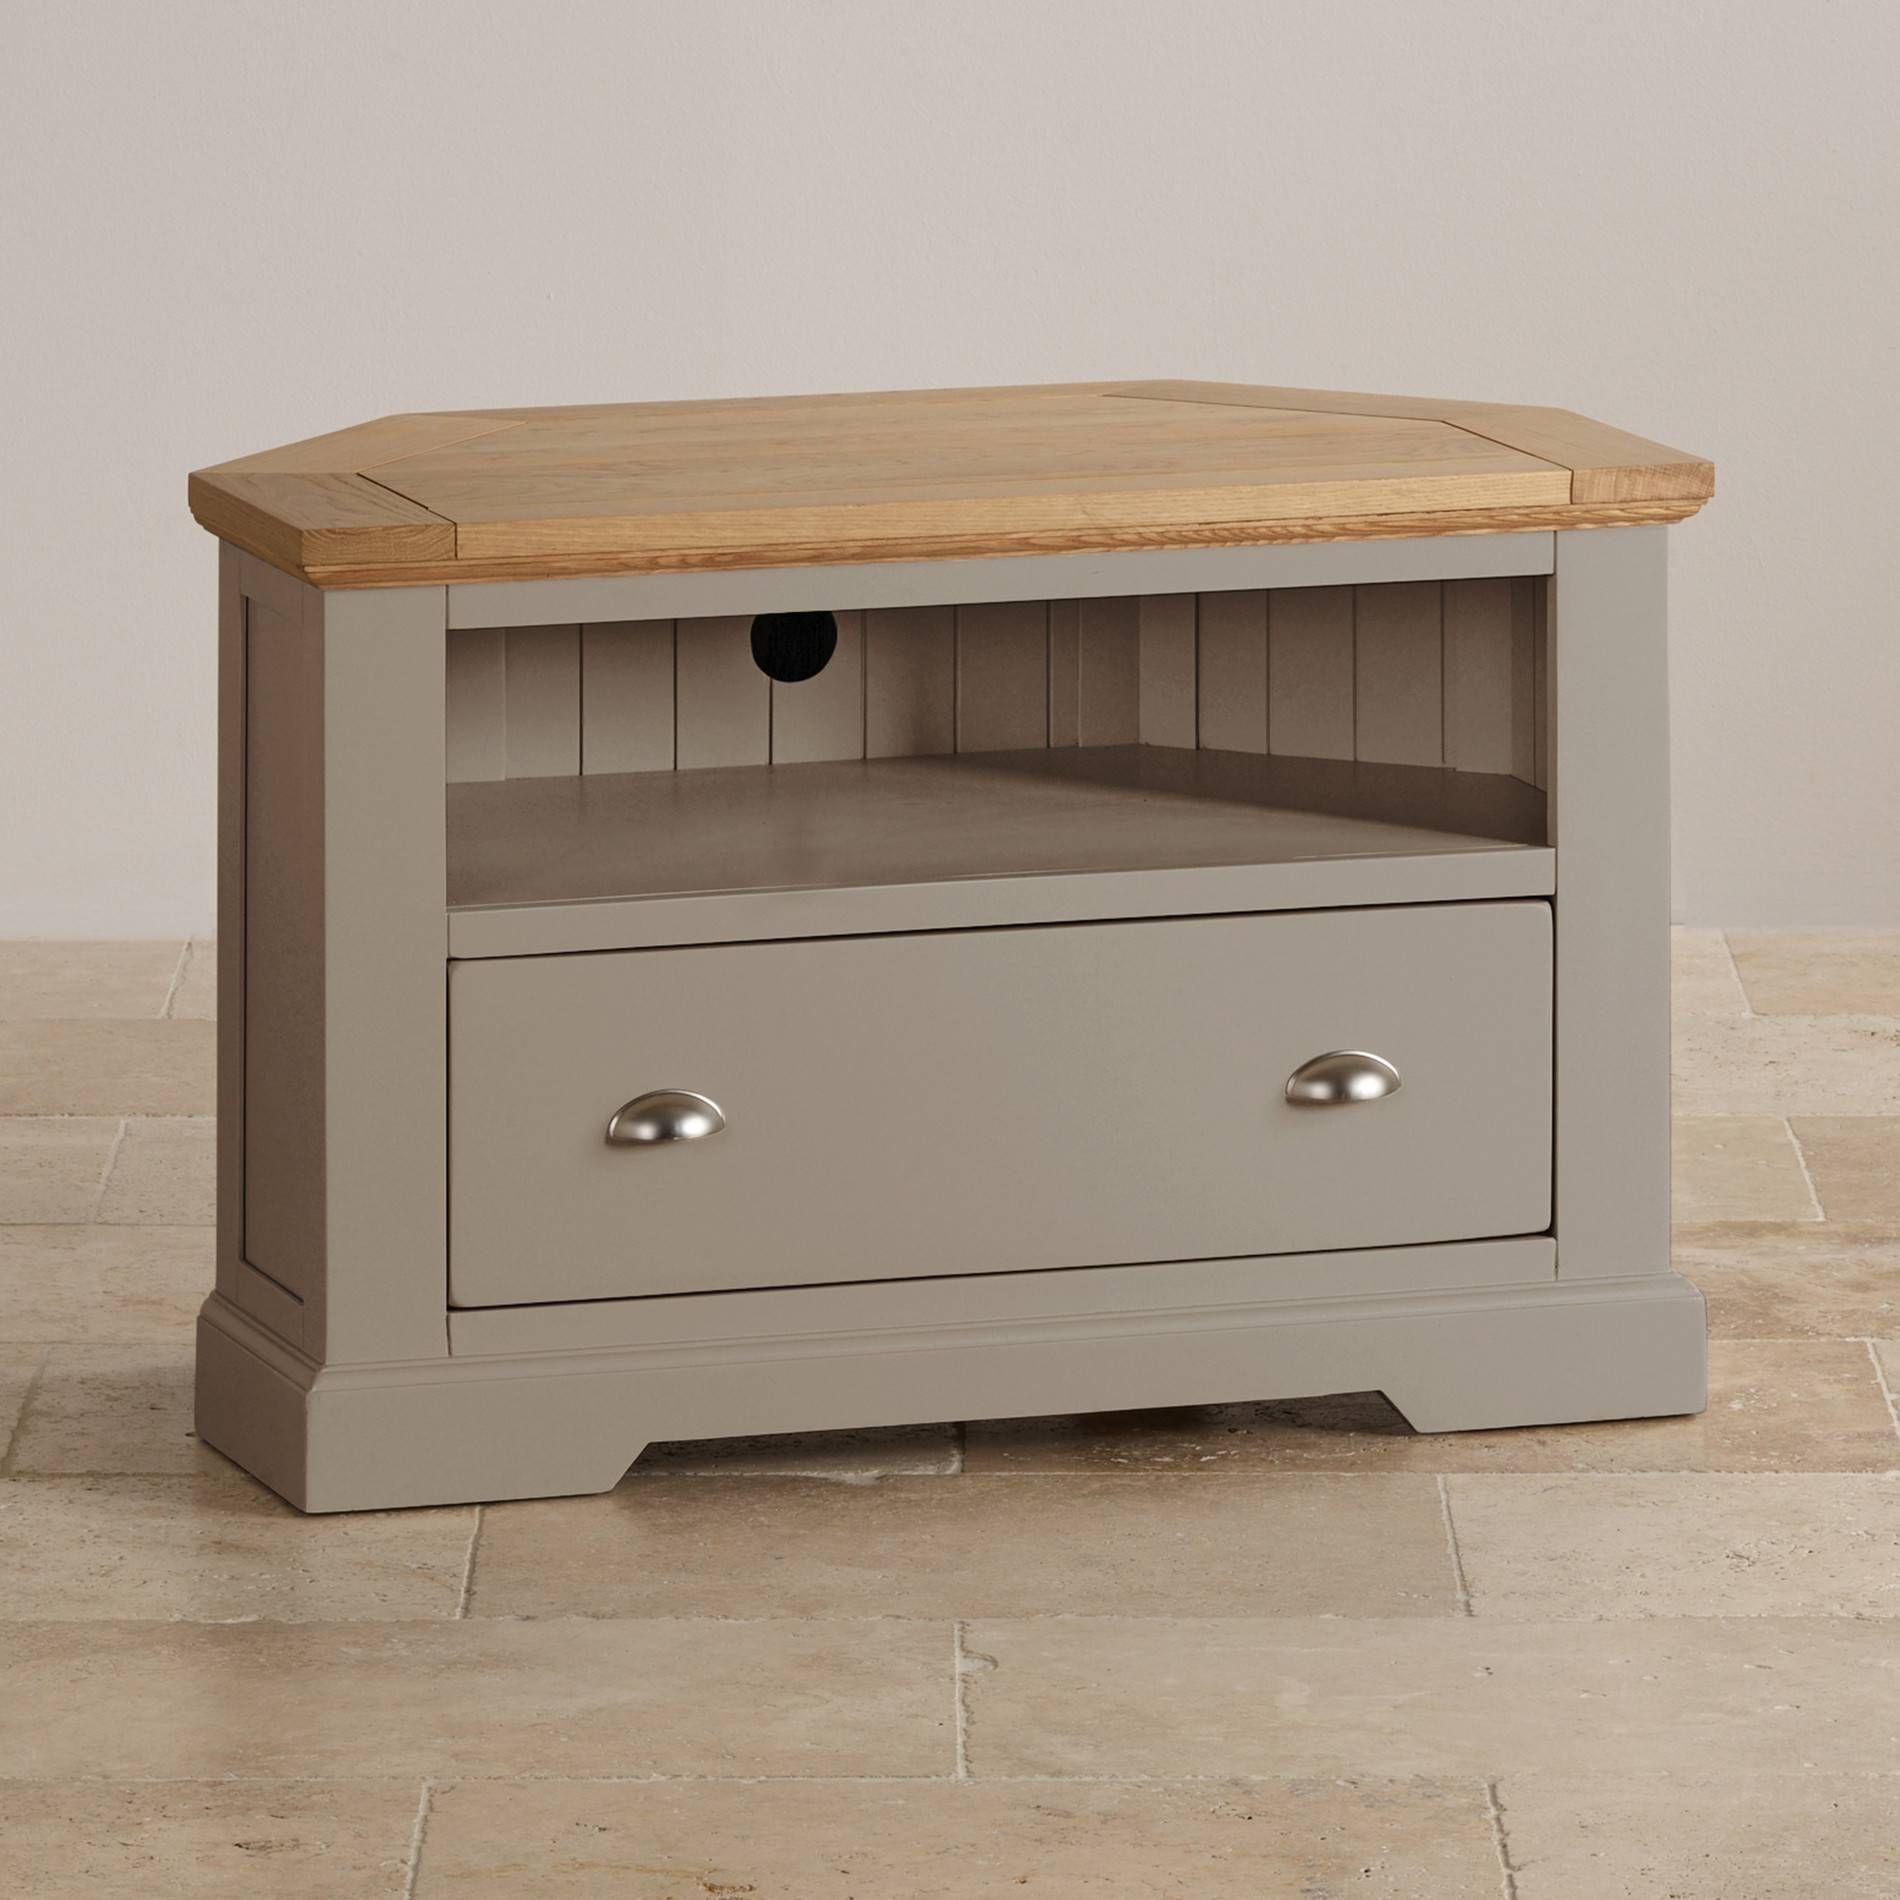 St Ives Corner Tv Unit In Grey Painted Acacia With Oak Top Inside Light Oak Corner Tv Cabinets (View 1 of 15)